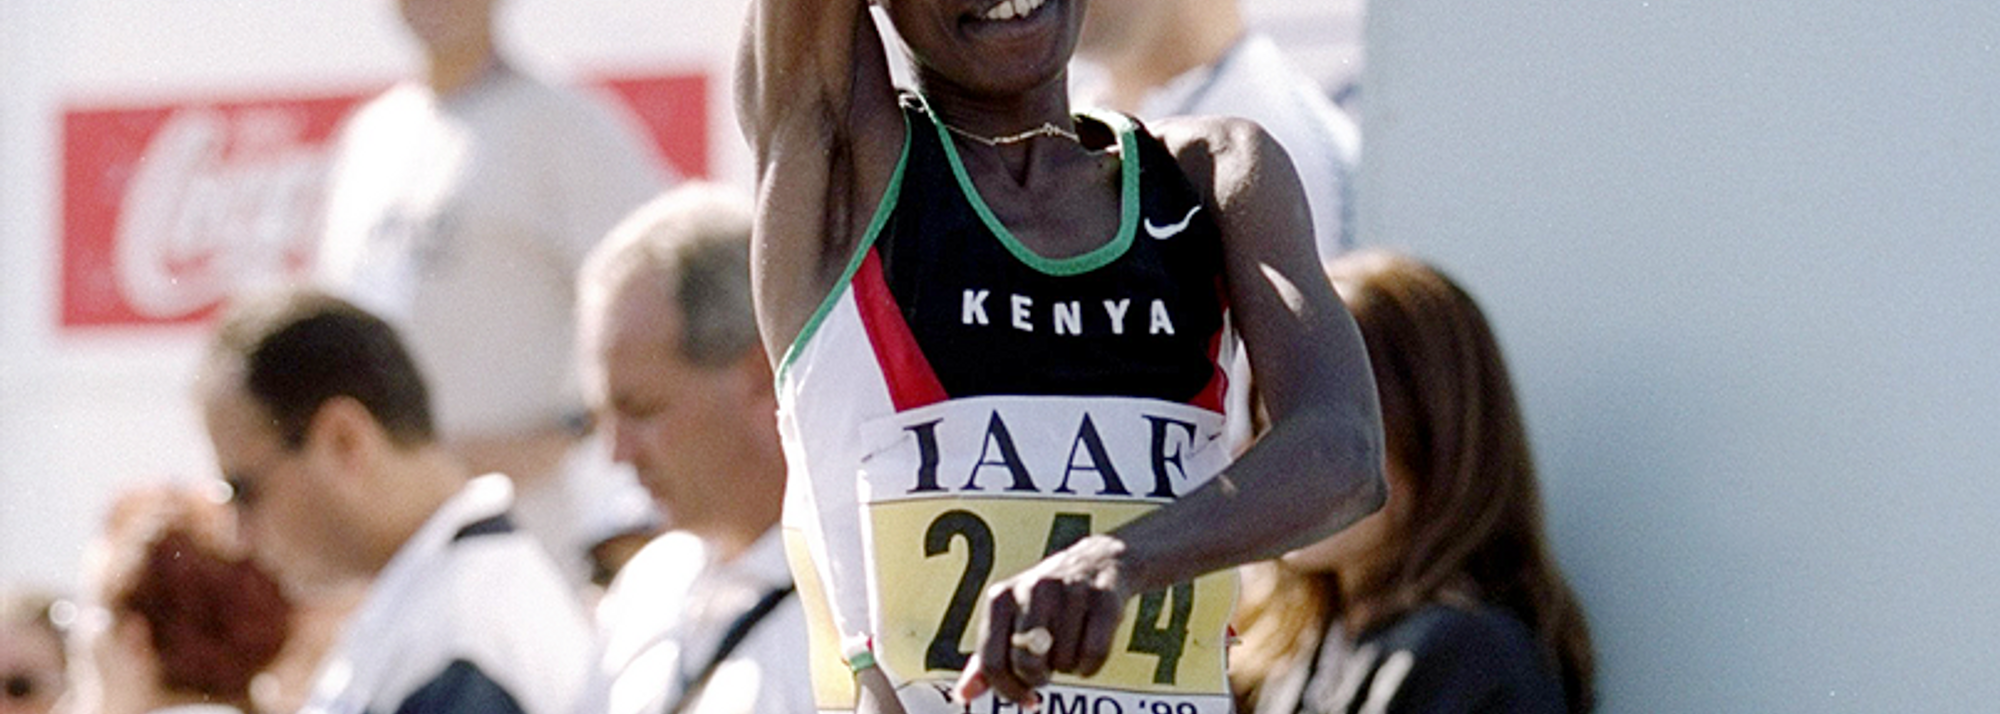 Should Paula Radcliffe live up to her status as favourite for the World Half Marathon title, she will join the great Tegla Loroupe as the only three-time winner of this event.